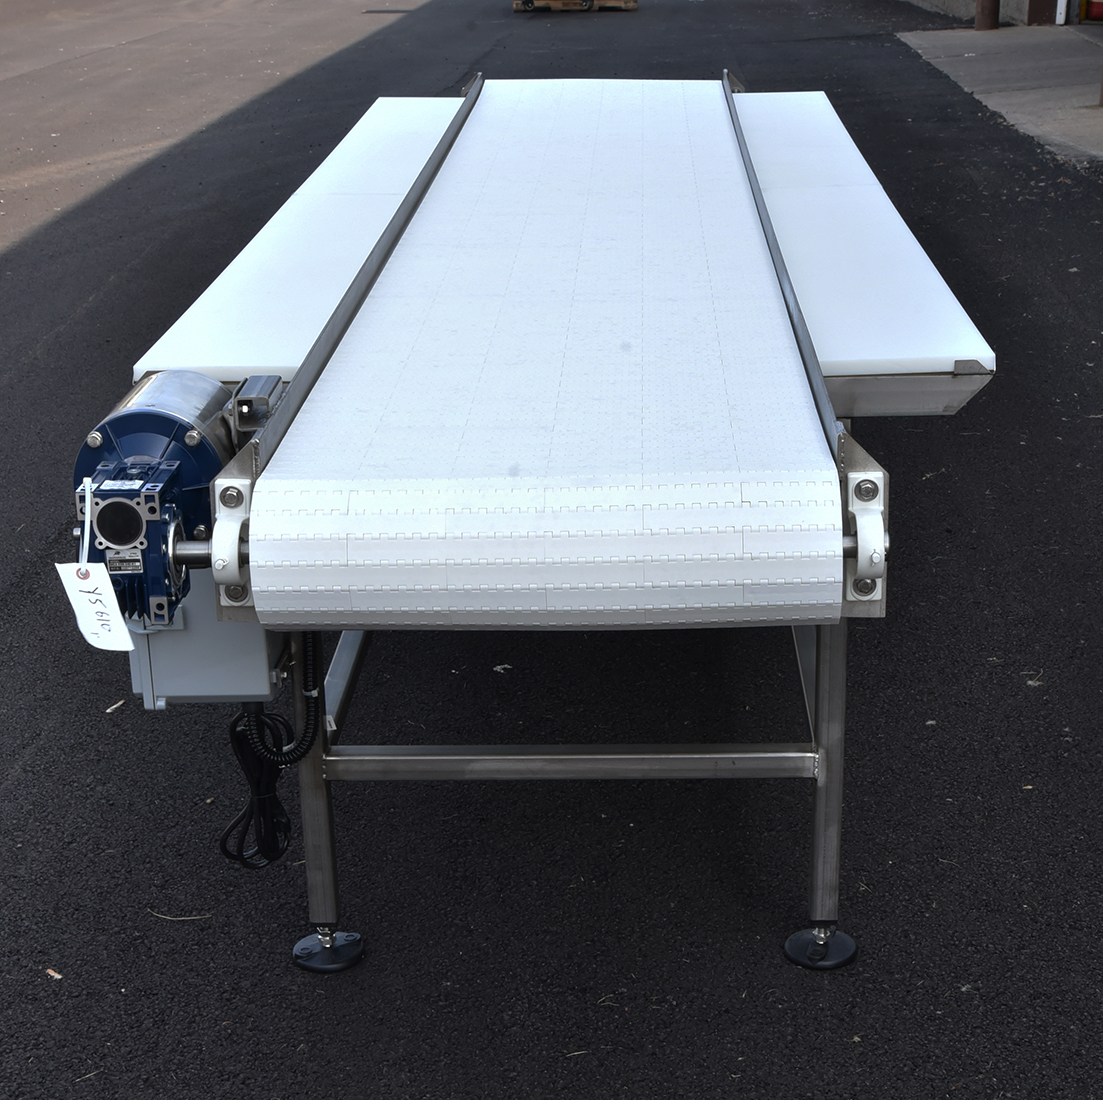 INSPECTION TABLE, 12 feet long by 24 inches wide conveyor belt, with cutting boards, food grade, stainless steel, in-stock new, Alard Equipment Corp item Y5610